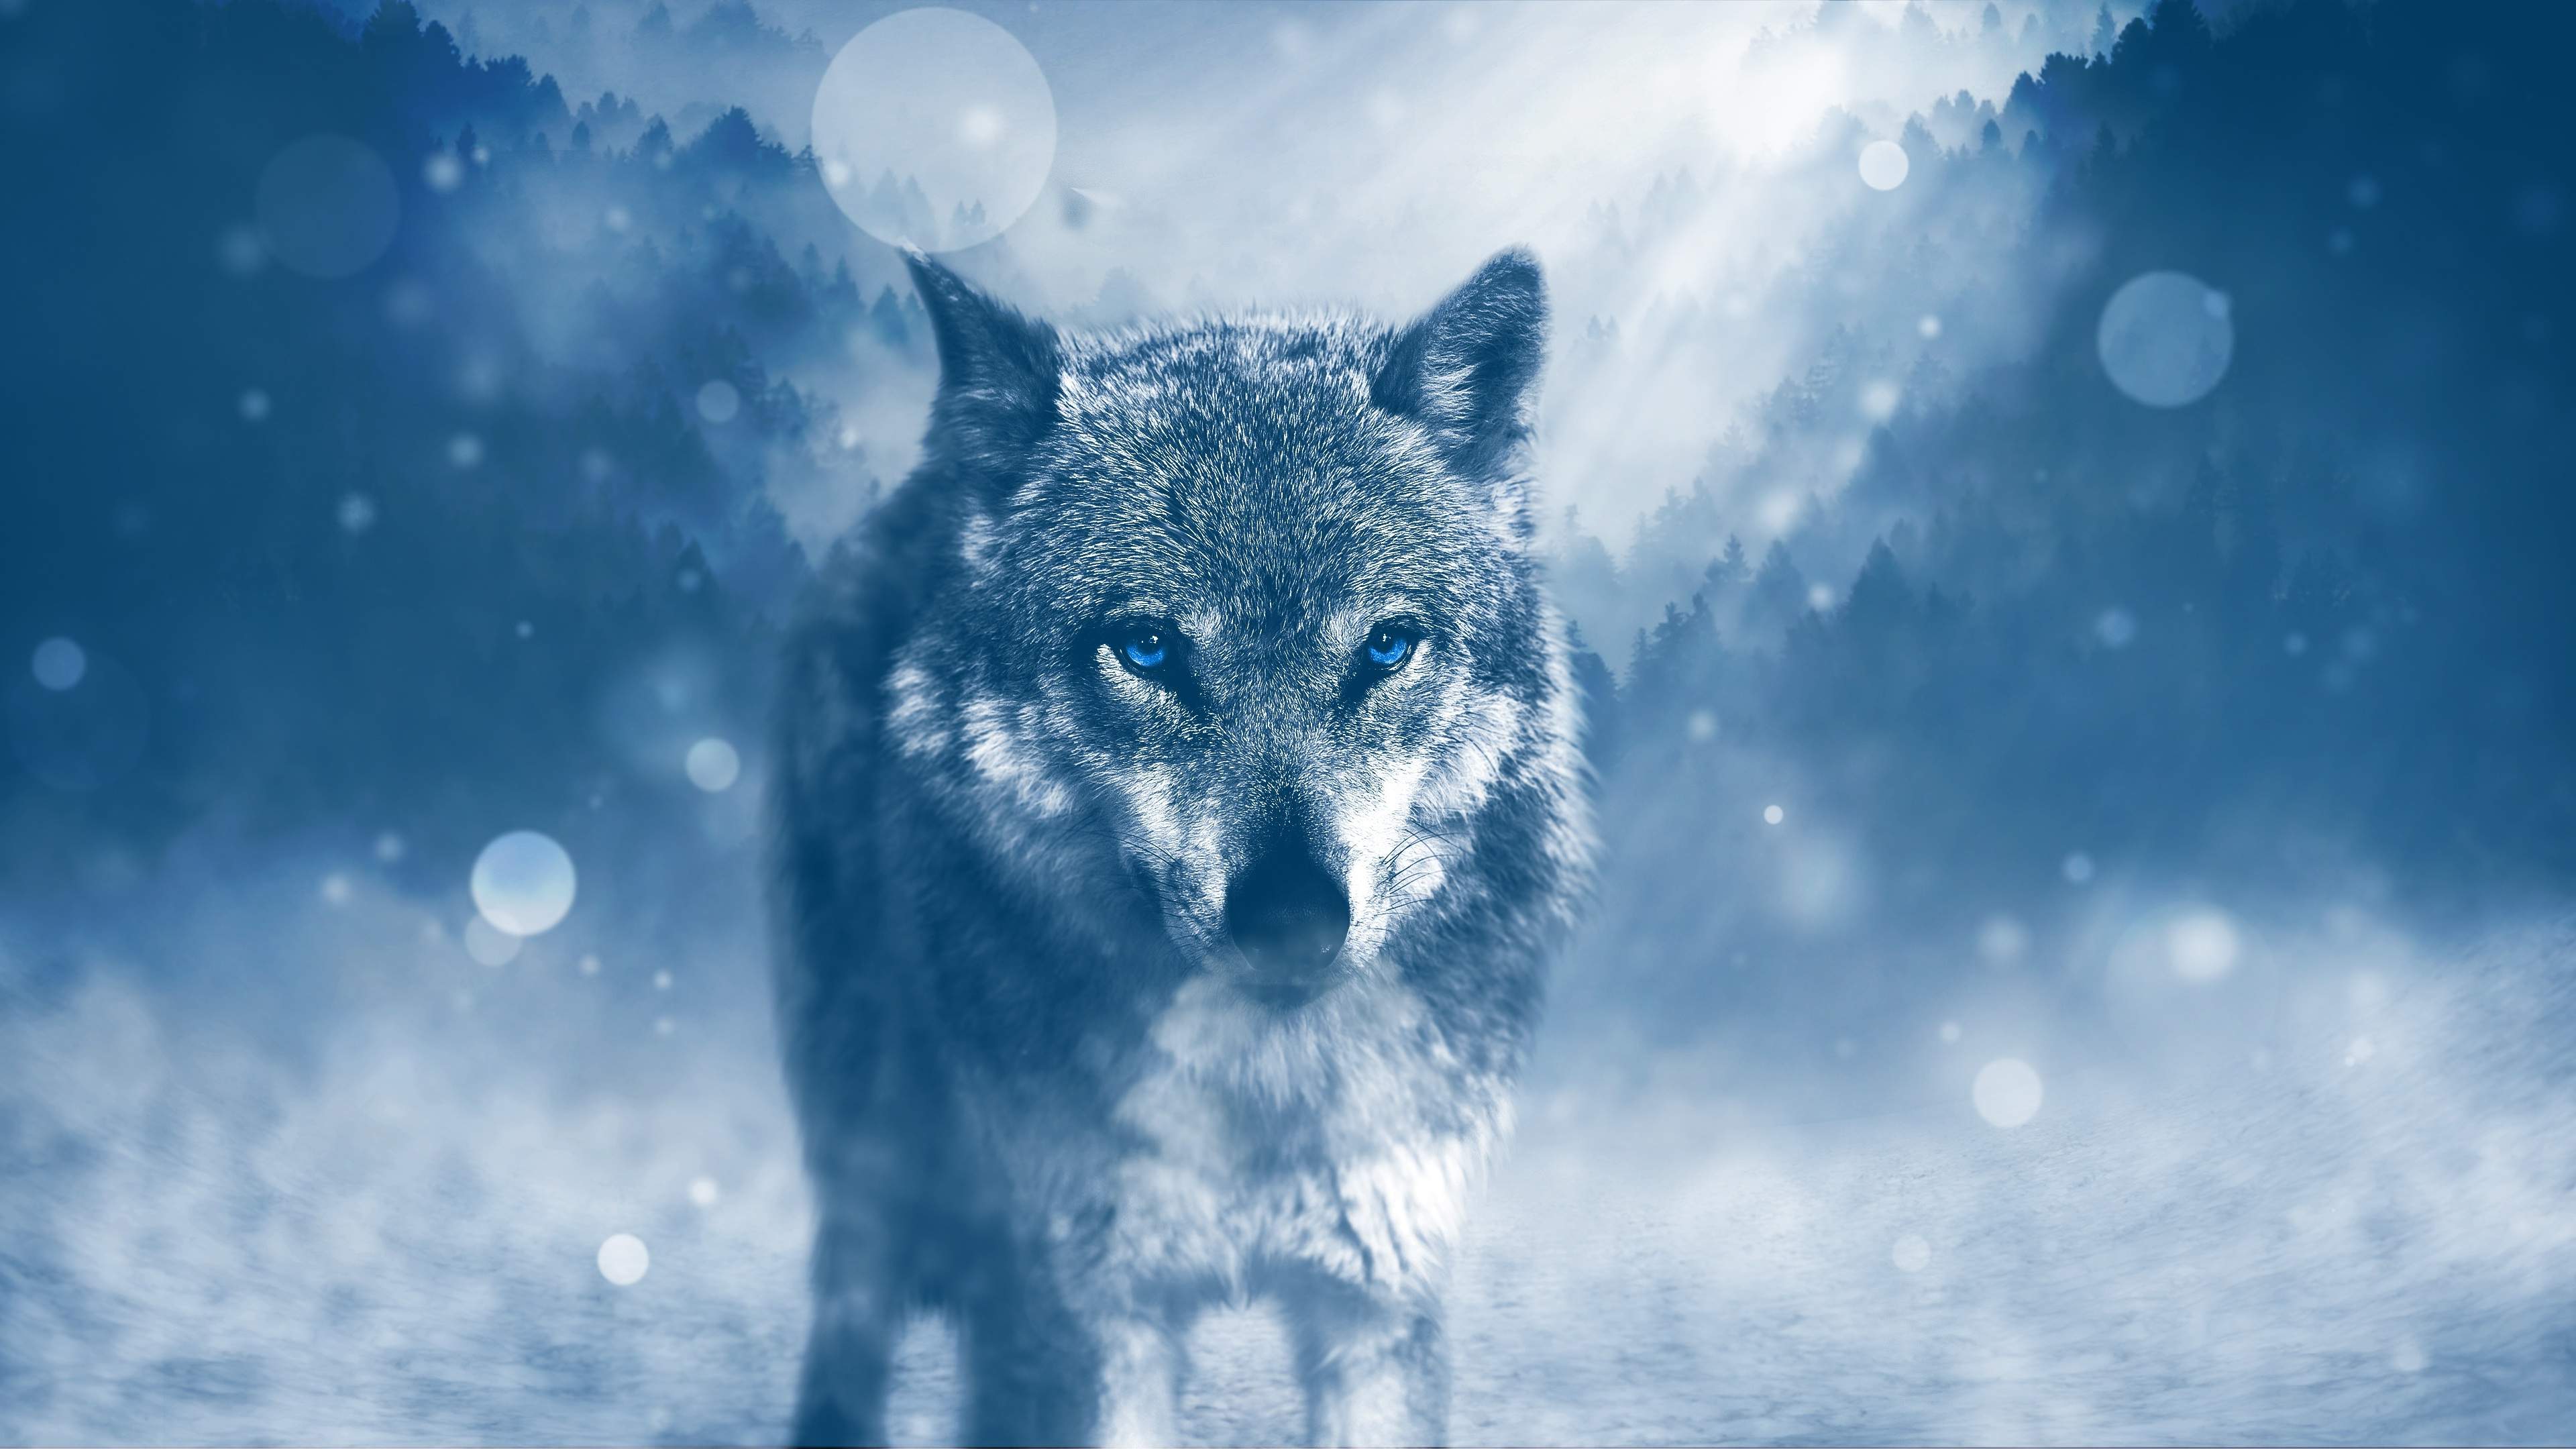 150 Wolf Eyes Night Stock Video Footage  4K and HD Video Clips   Shutterstock